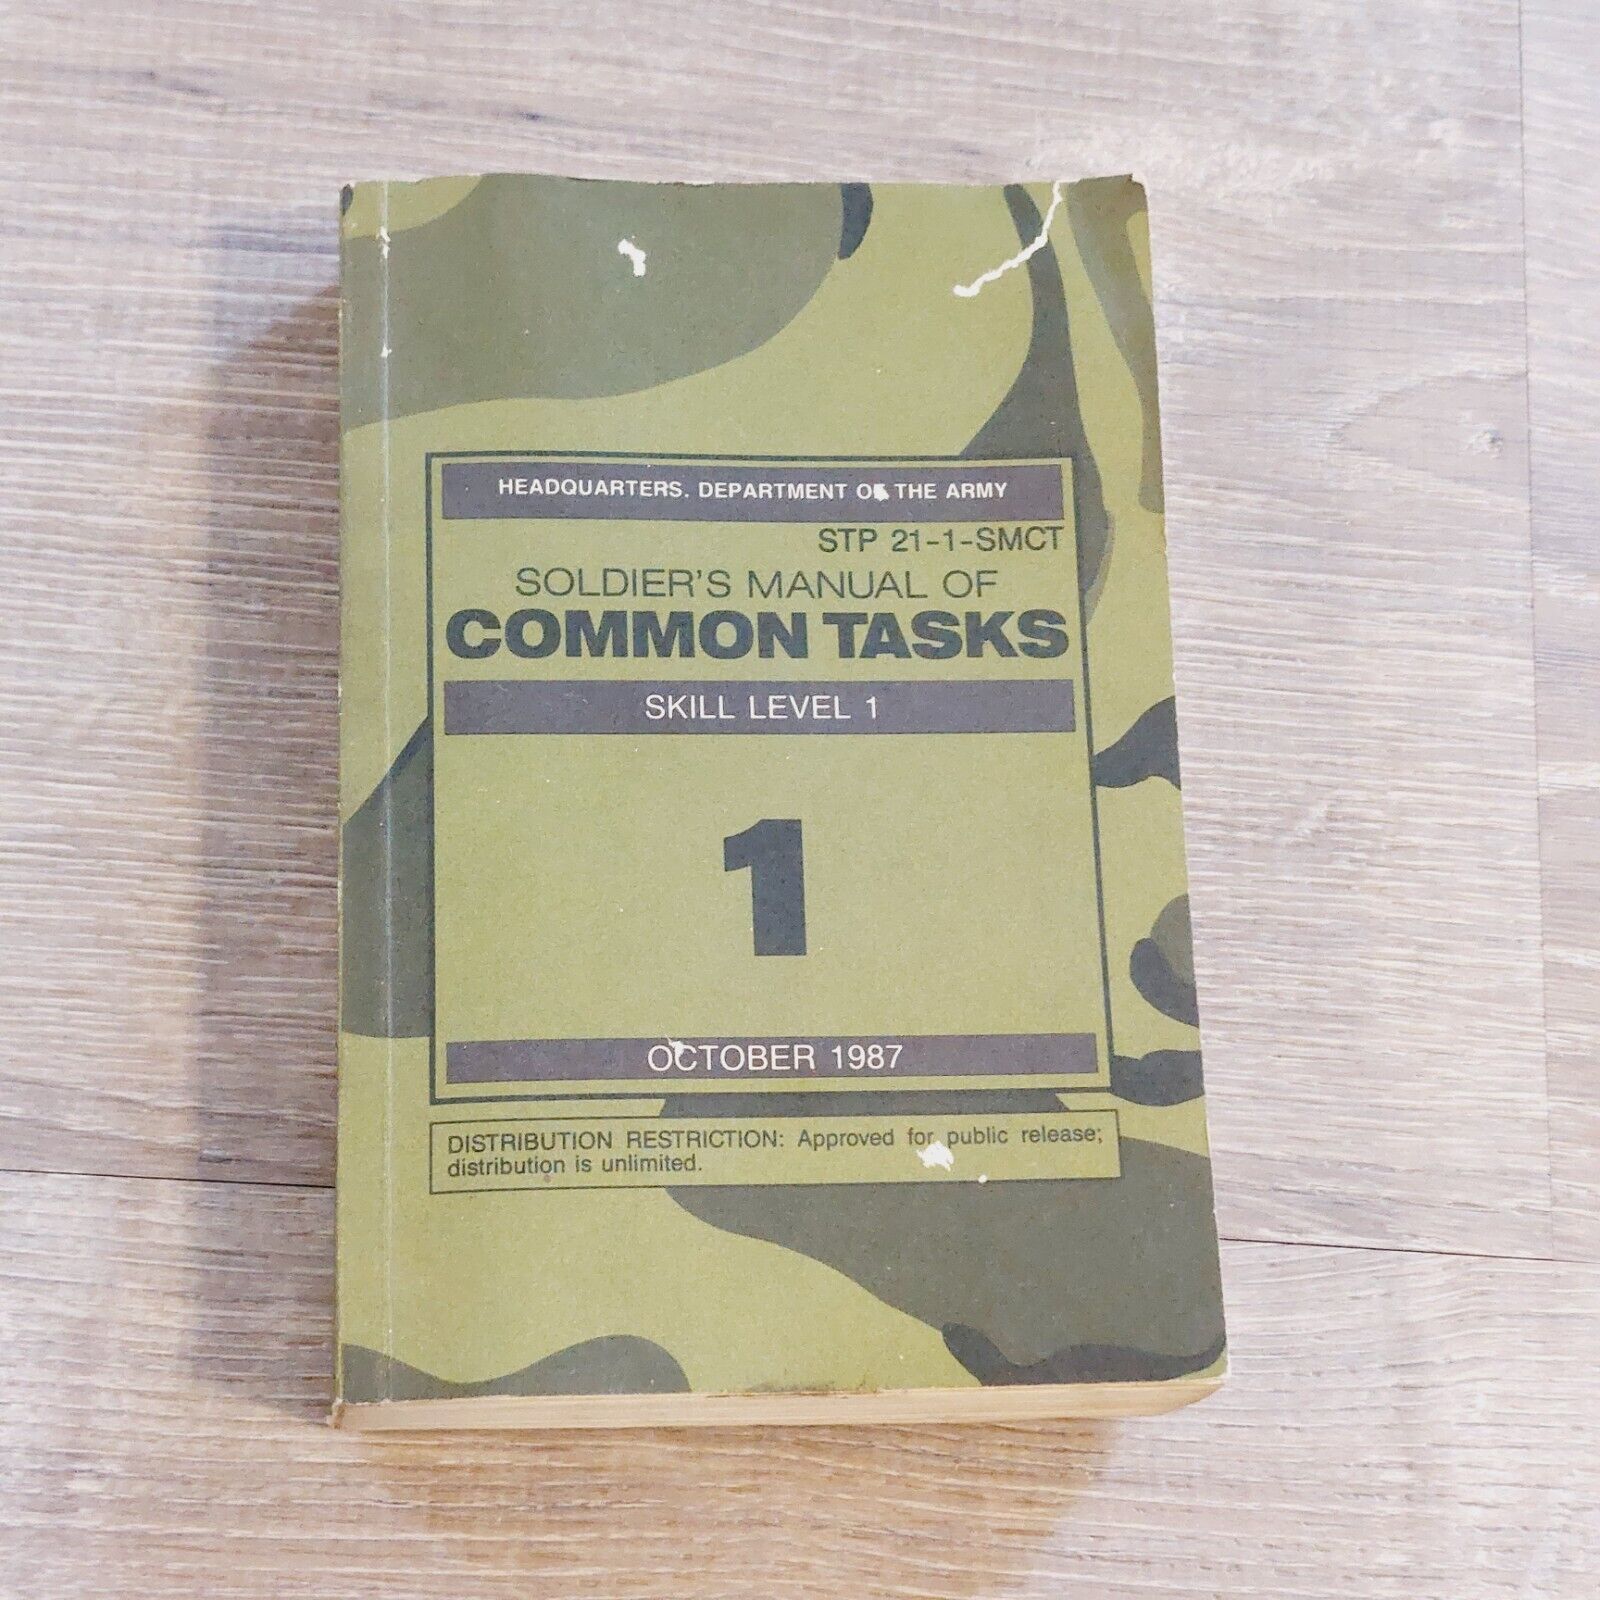 Soldier\'s Manual of Common Tasks Skill Level 1 STP 21-1-SMCT October 1987